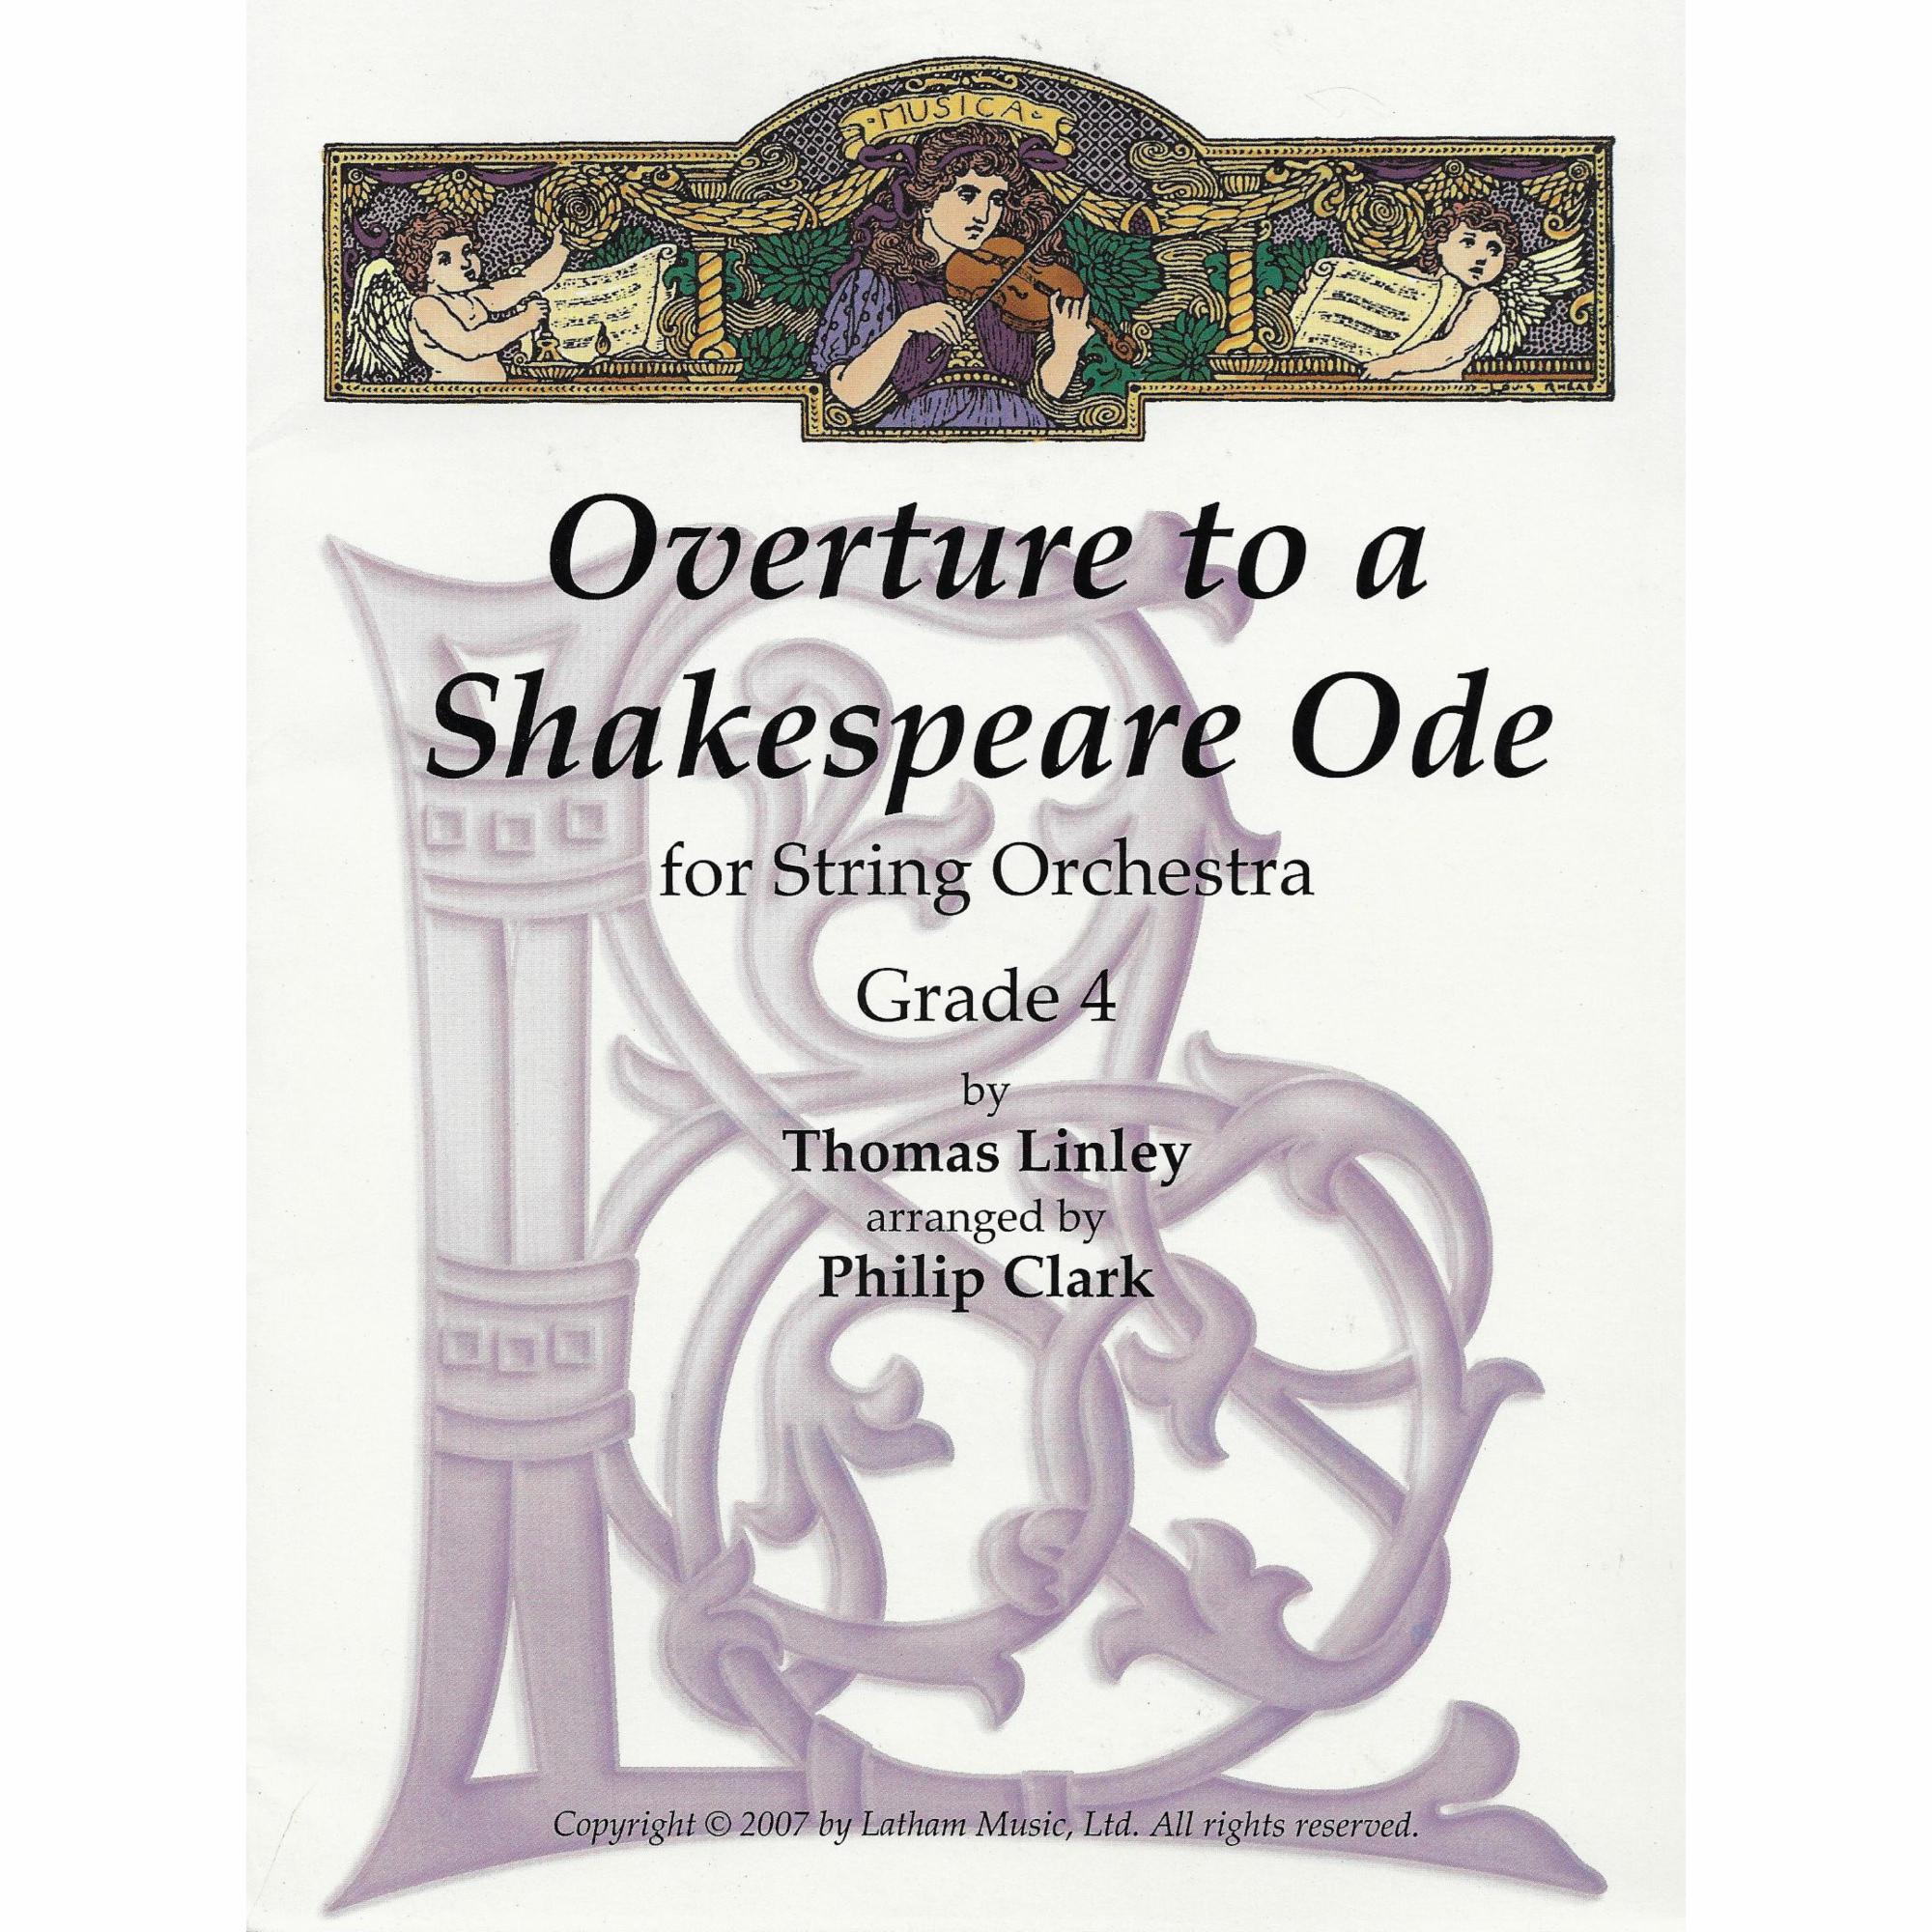 Overture to a Shakespeare Ode for String Orchestra